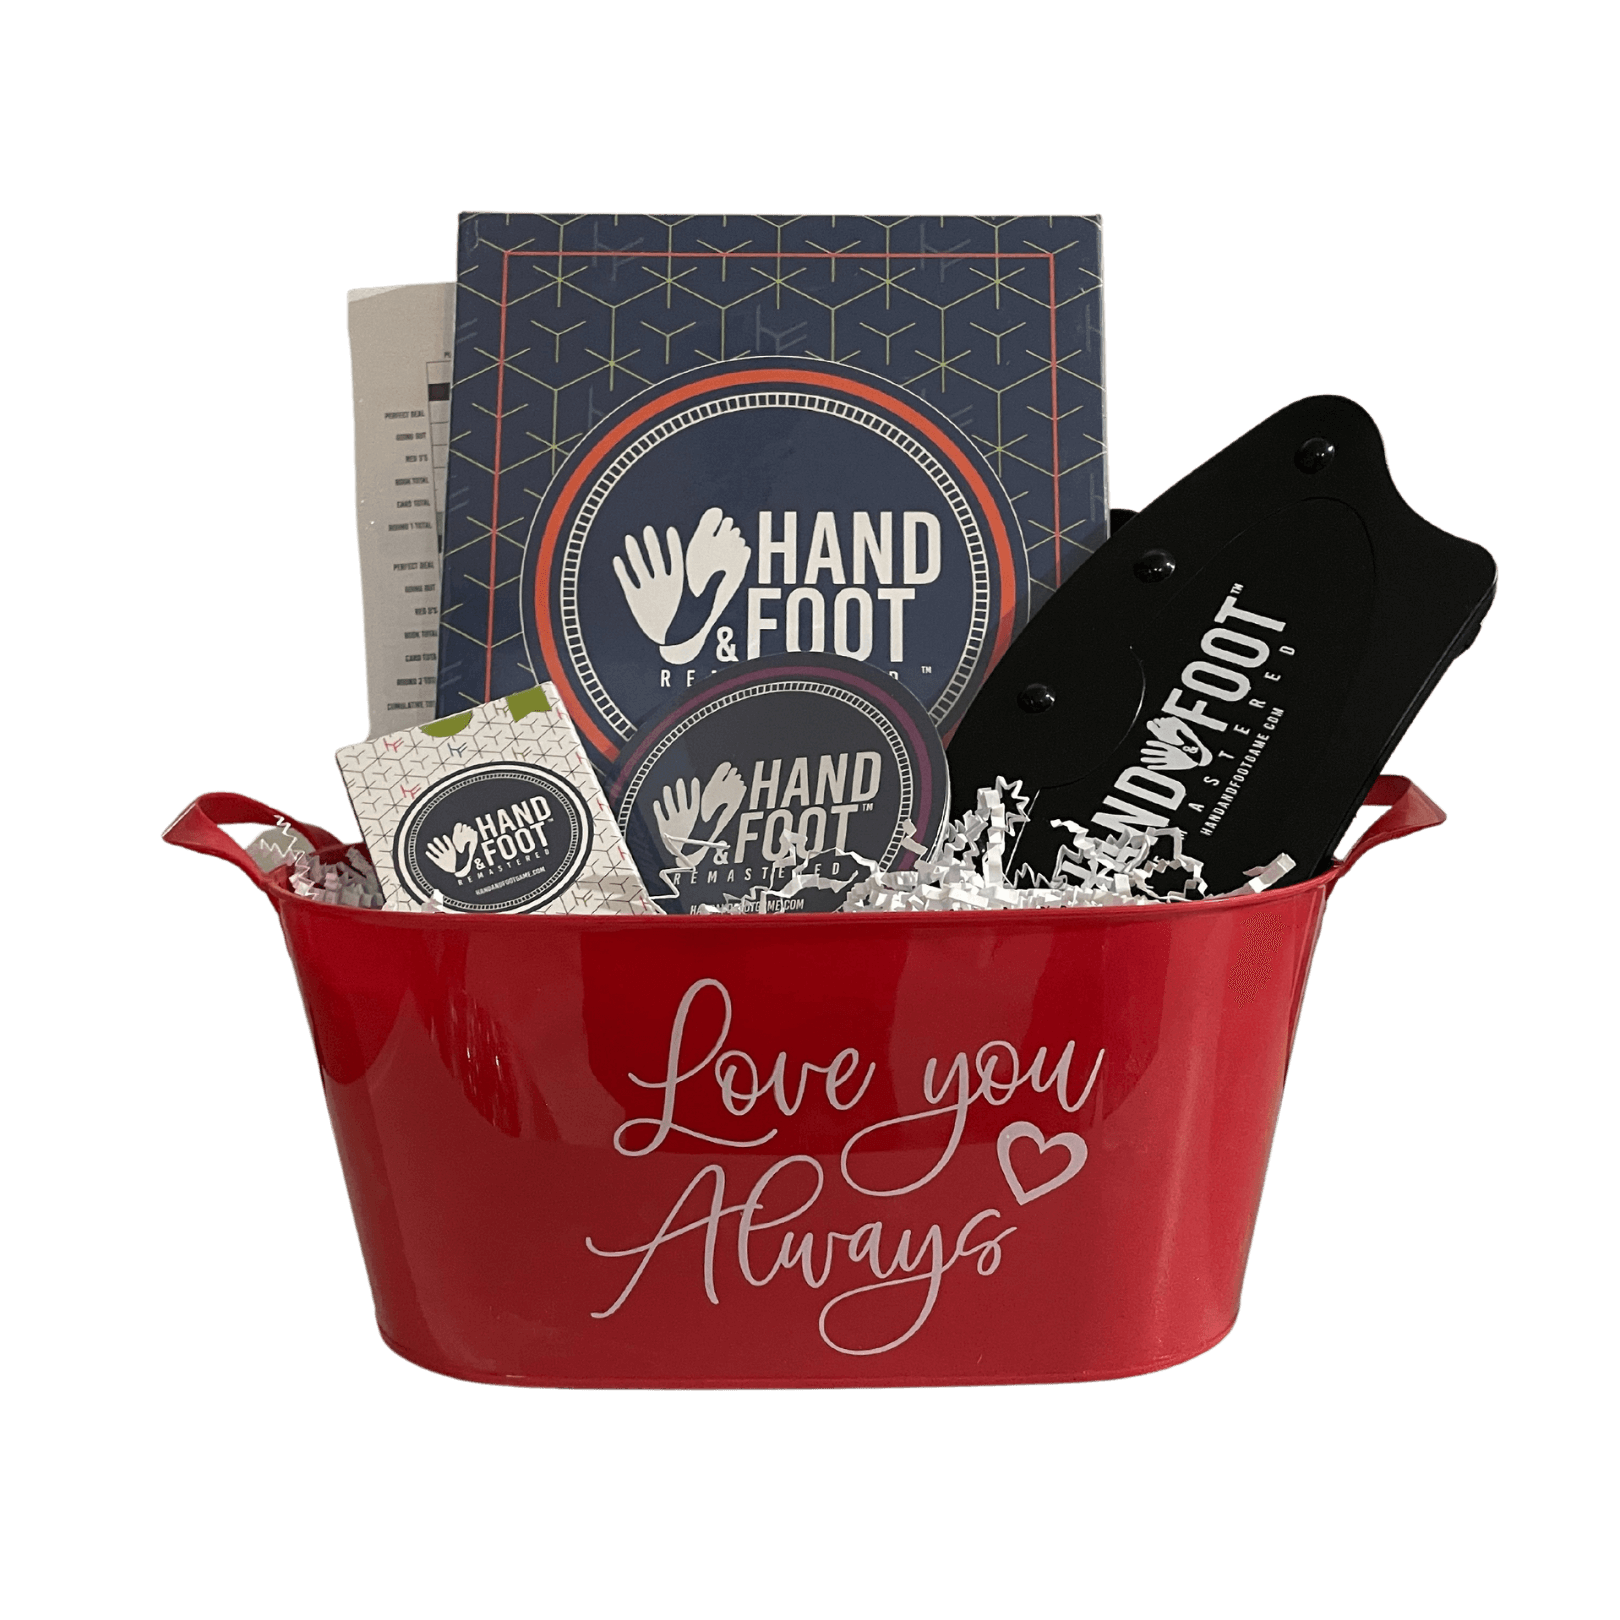 Hand & Foot Remastered 4 Player Valentine's Day Gift Set - Love You Always